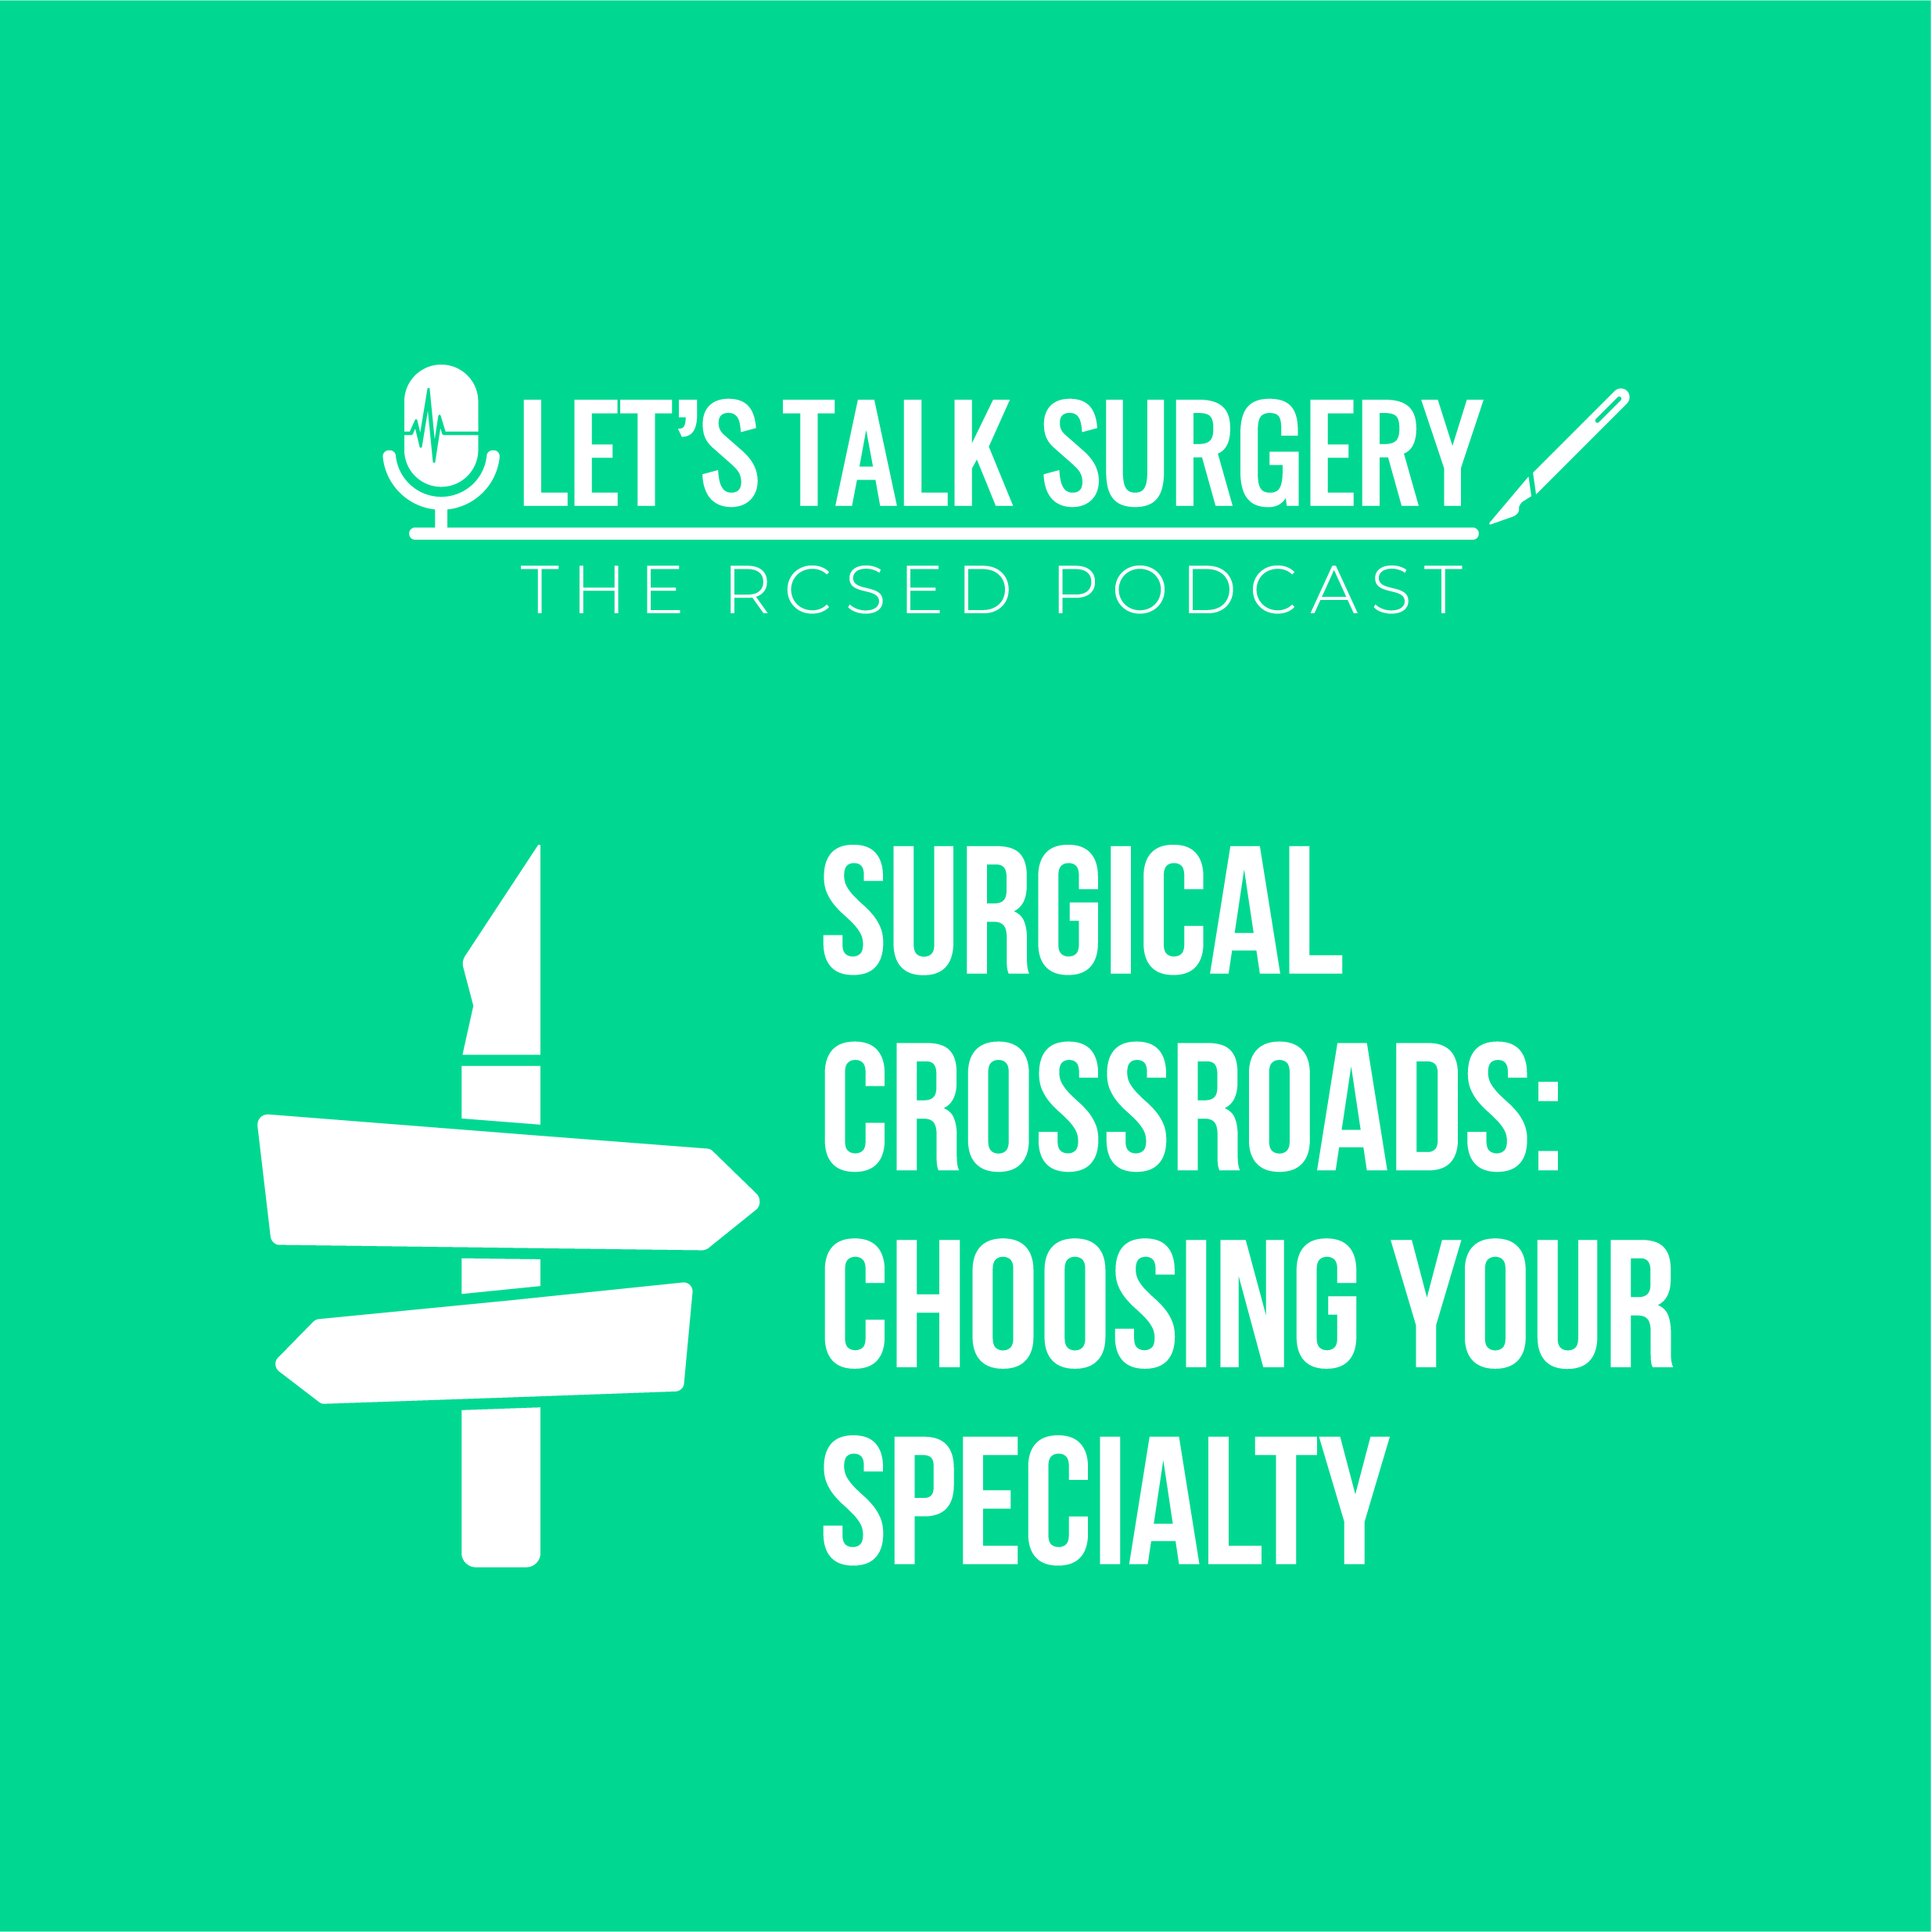 Let's Talk Surgery Podcast, Surgical Crossroads: Choosing your specialty - "The Paediatrics Episode"